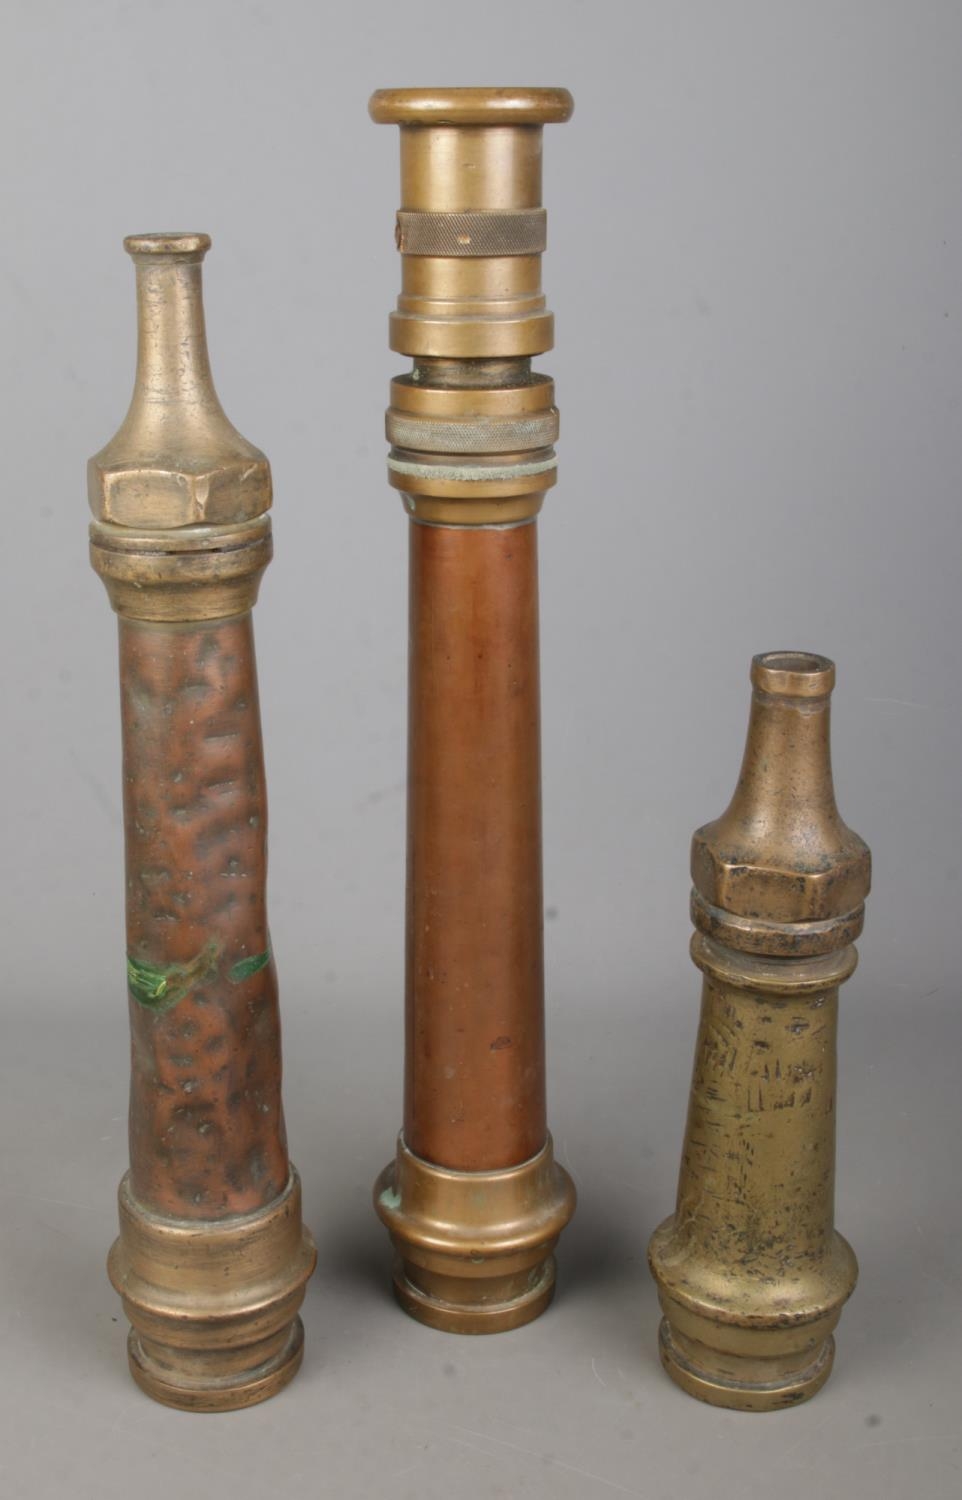 Three antique brass and copper fire hose nozzles of varying sizes. Largest example length 49cm.